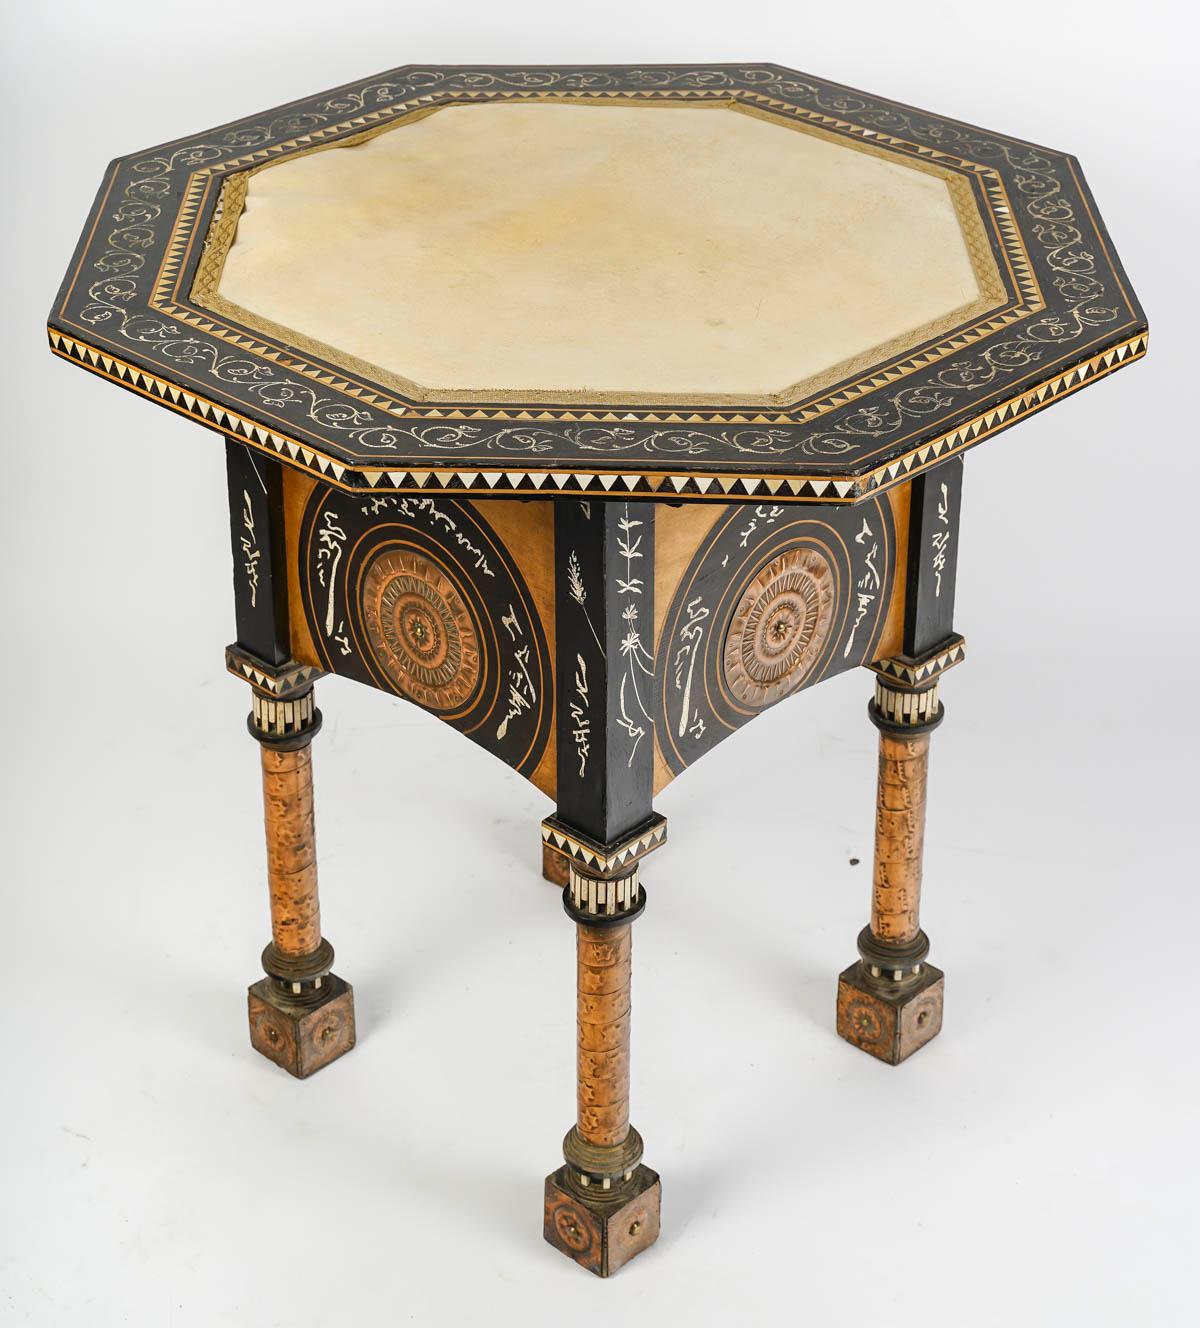 Pedestal table by Carlo Bugatti, 19th Century, Wood, mother of pearl, copper and parchment marquetry.

Carlo Bugatti pedestal table, late 19th century or early 20th century, inlaid with wood, bone, mother-of-pearl, copper and parchment (partial